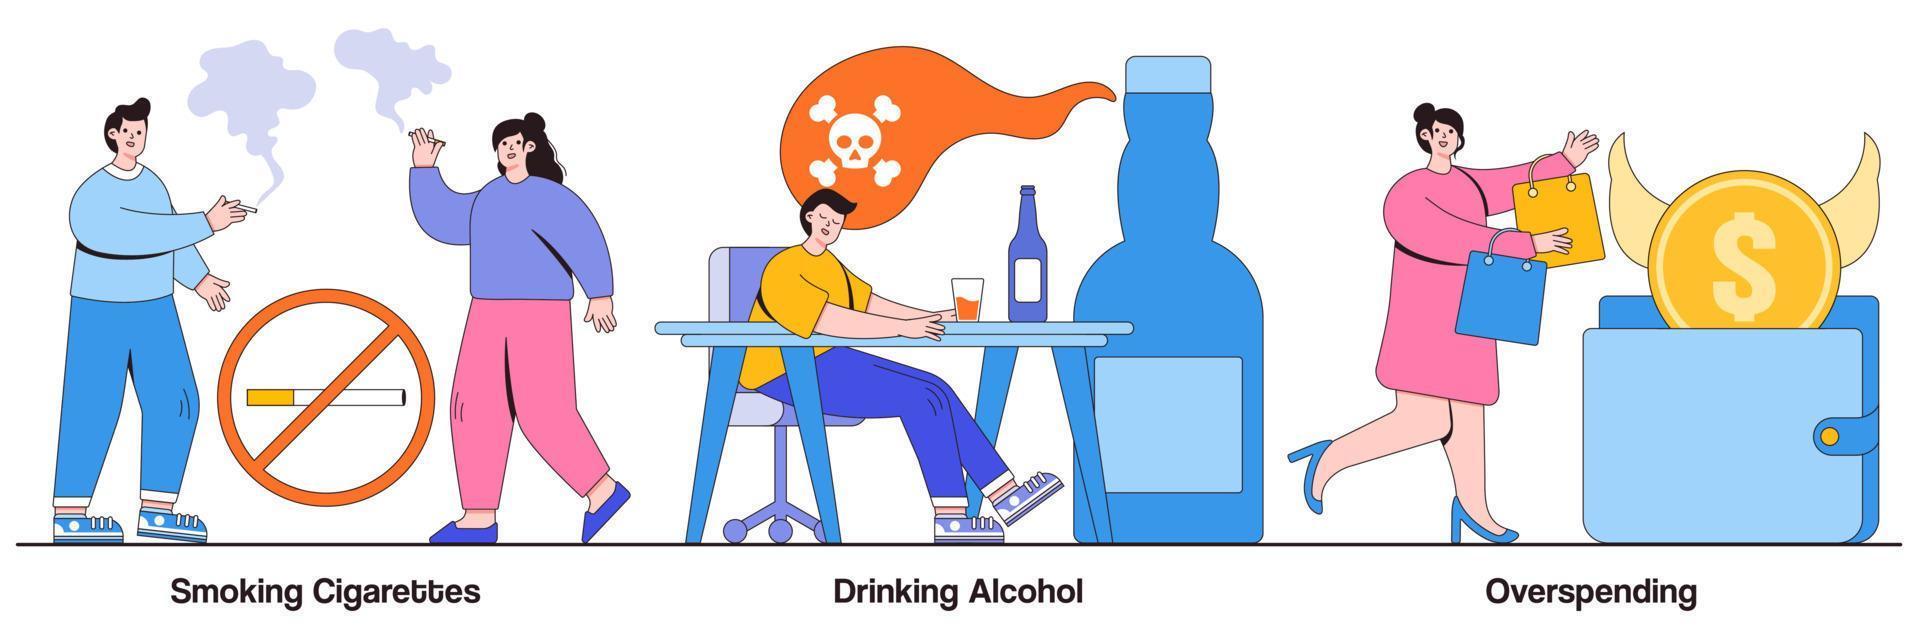 Smoking cigarettes, drinking alcohol, overspending concept with tiny people. Bad habits vector illustration set. Tobacco and nicotine addiction, alcoholism therapy, budget planning, stress metaphor